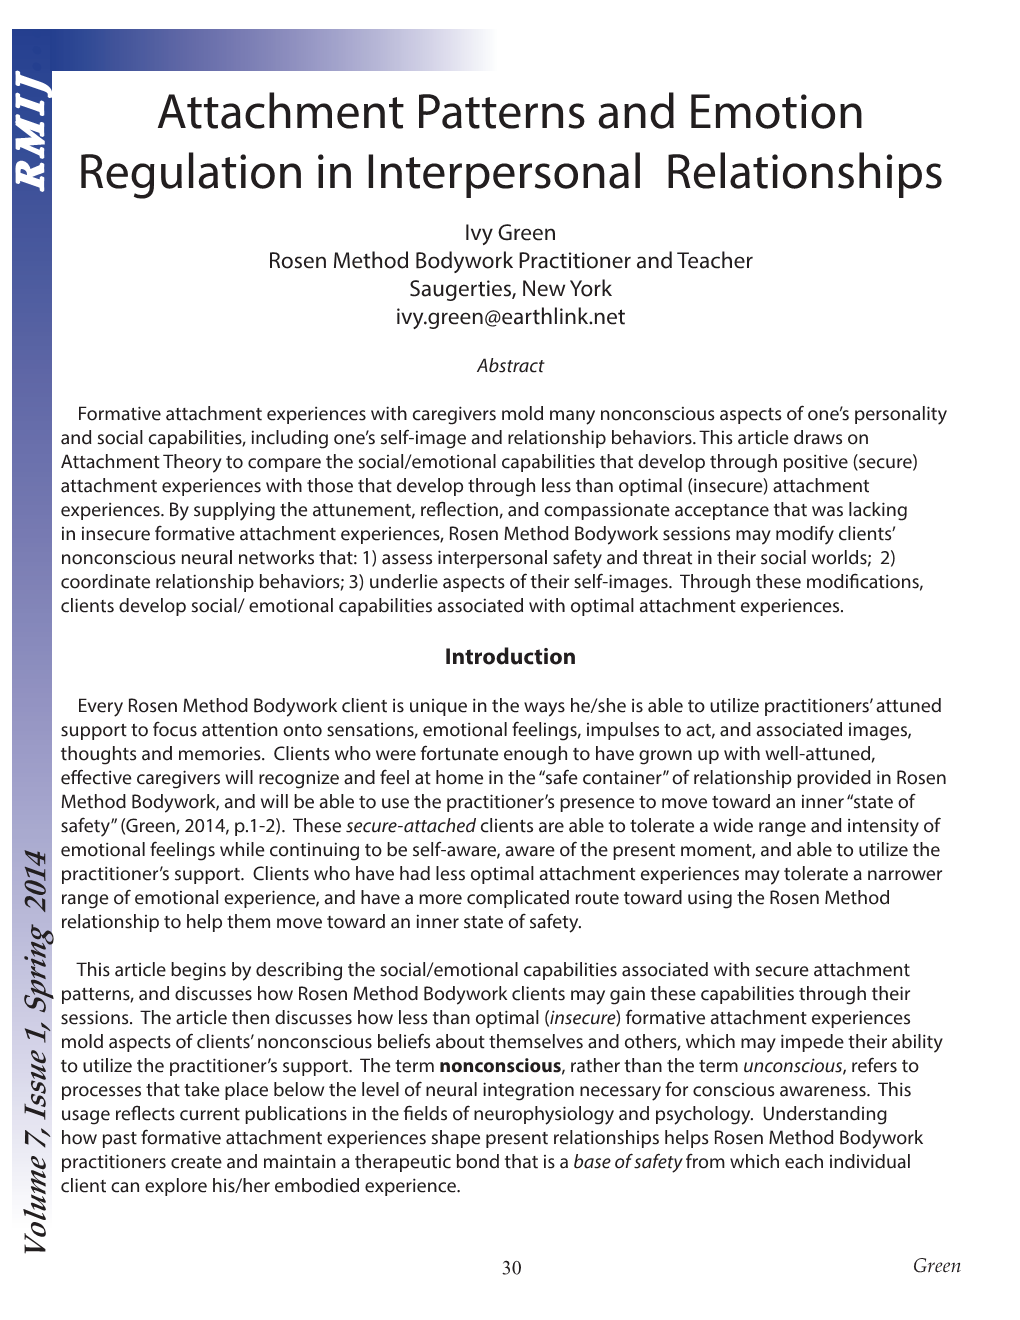 Attachment Patterns and Emotion Regulation in Interpersonal